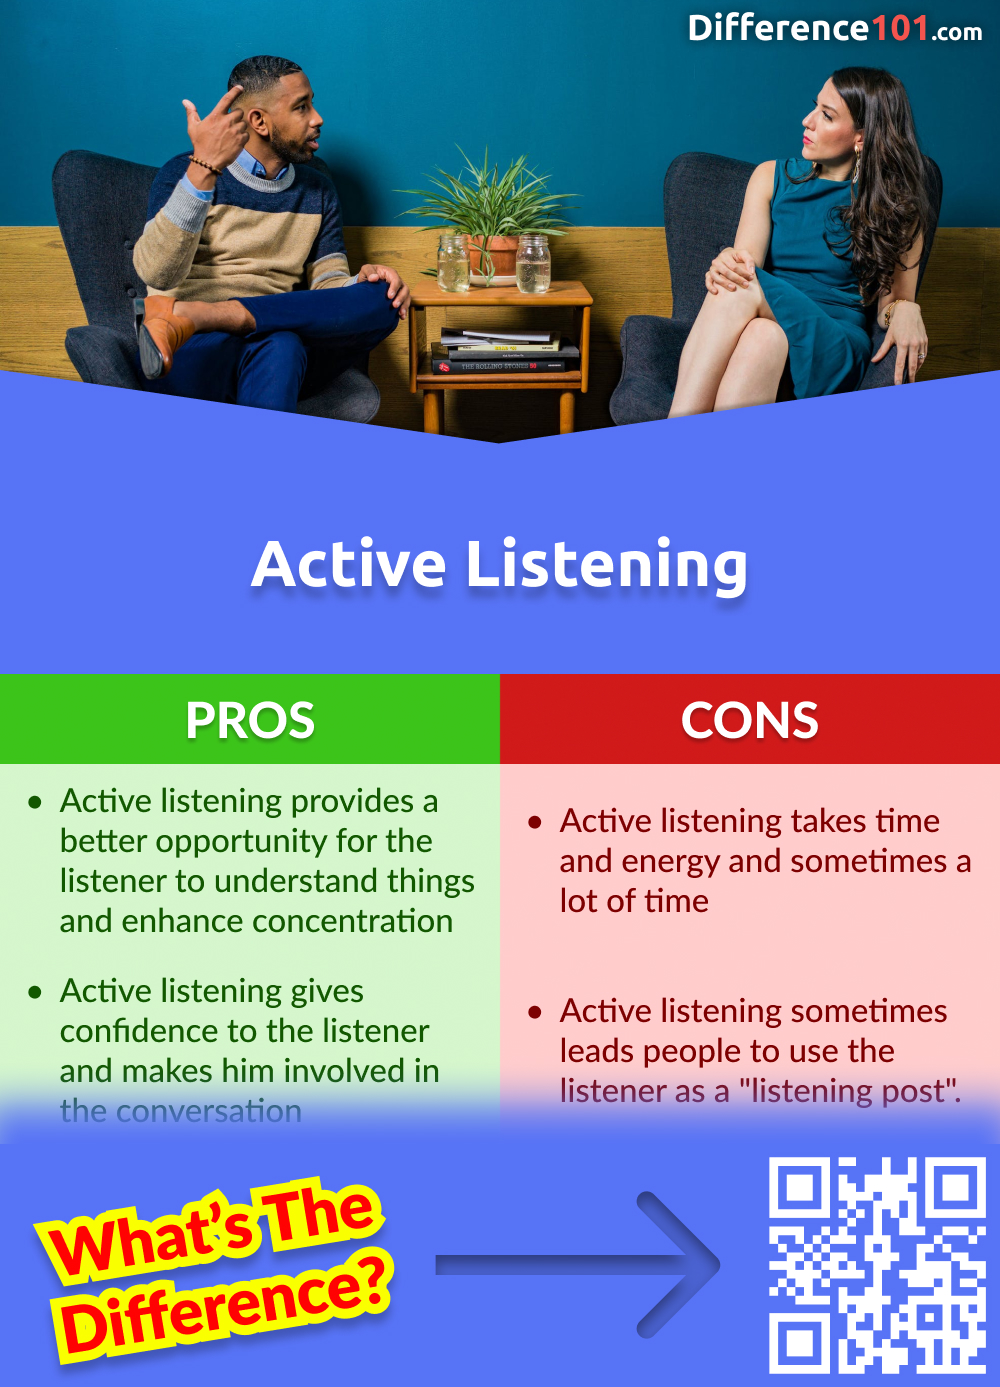 Active Listening Pros and Cons